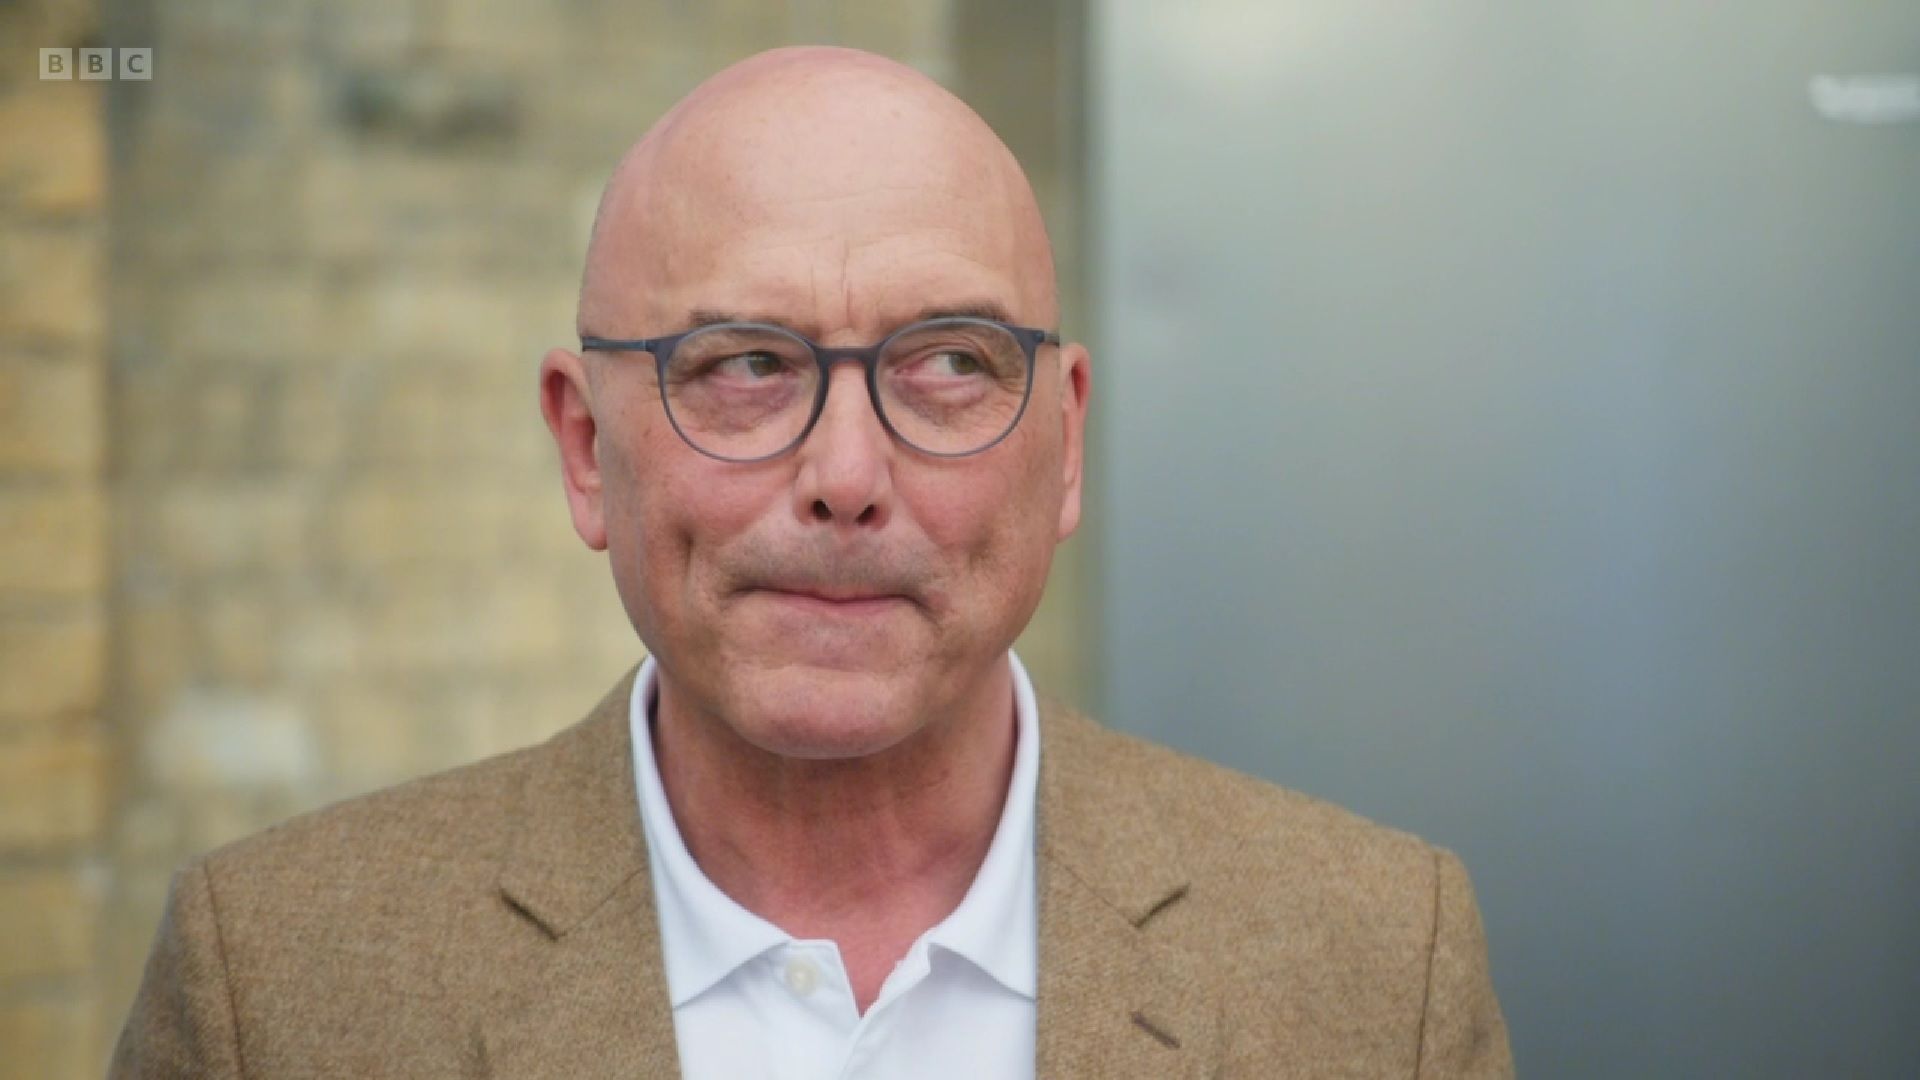 Channel 4's shocking Gregg Wallace: The British Miracle Meat owes much to  Swift and his gruesome satire